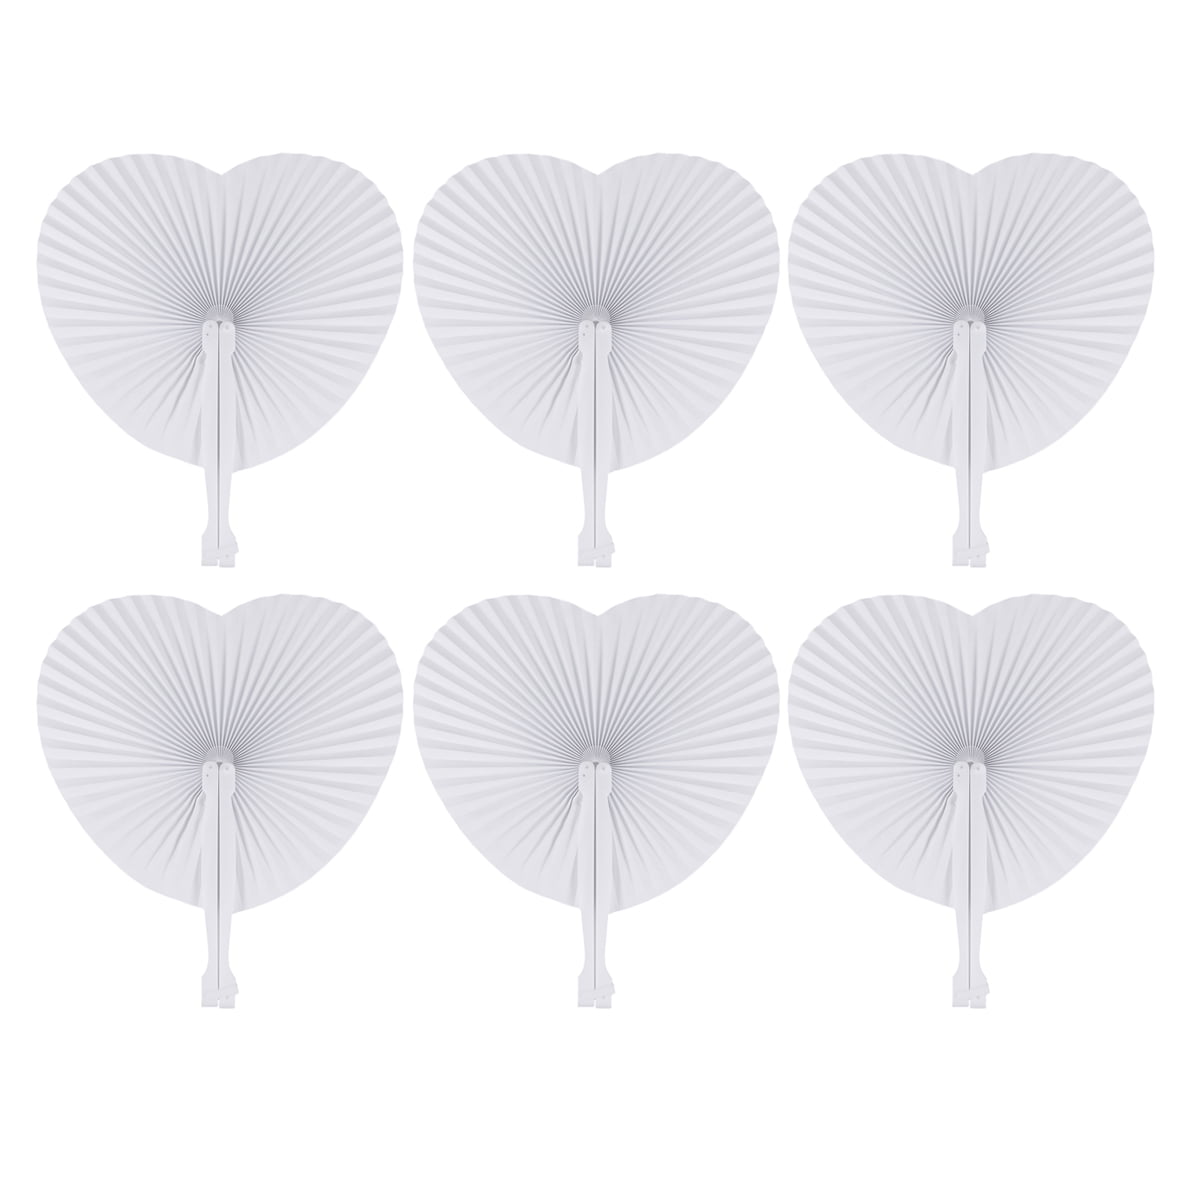 Fan Fans Folding Paper Hand Wedding White Handheld Heart Chinese Party